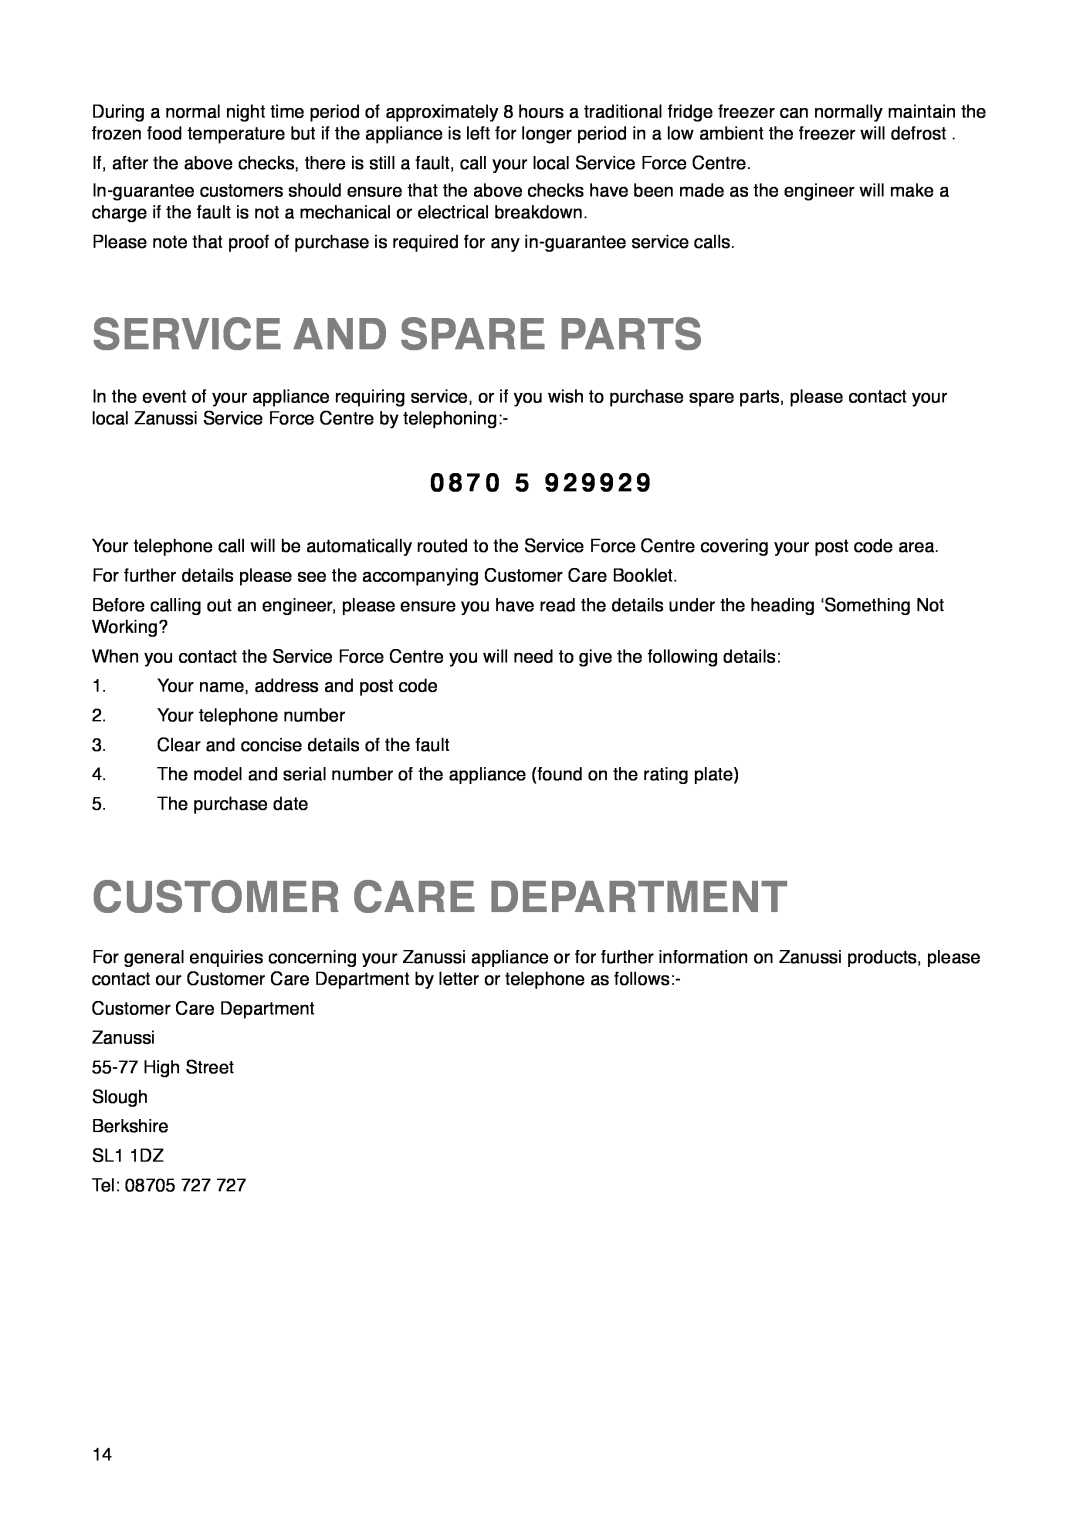 Zanussi ZK 60/30 RM manual Service And Spare Parts, Customer Care Department, 0 8 7 0 